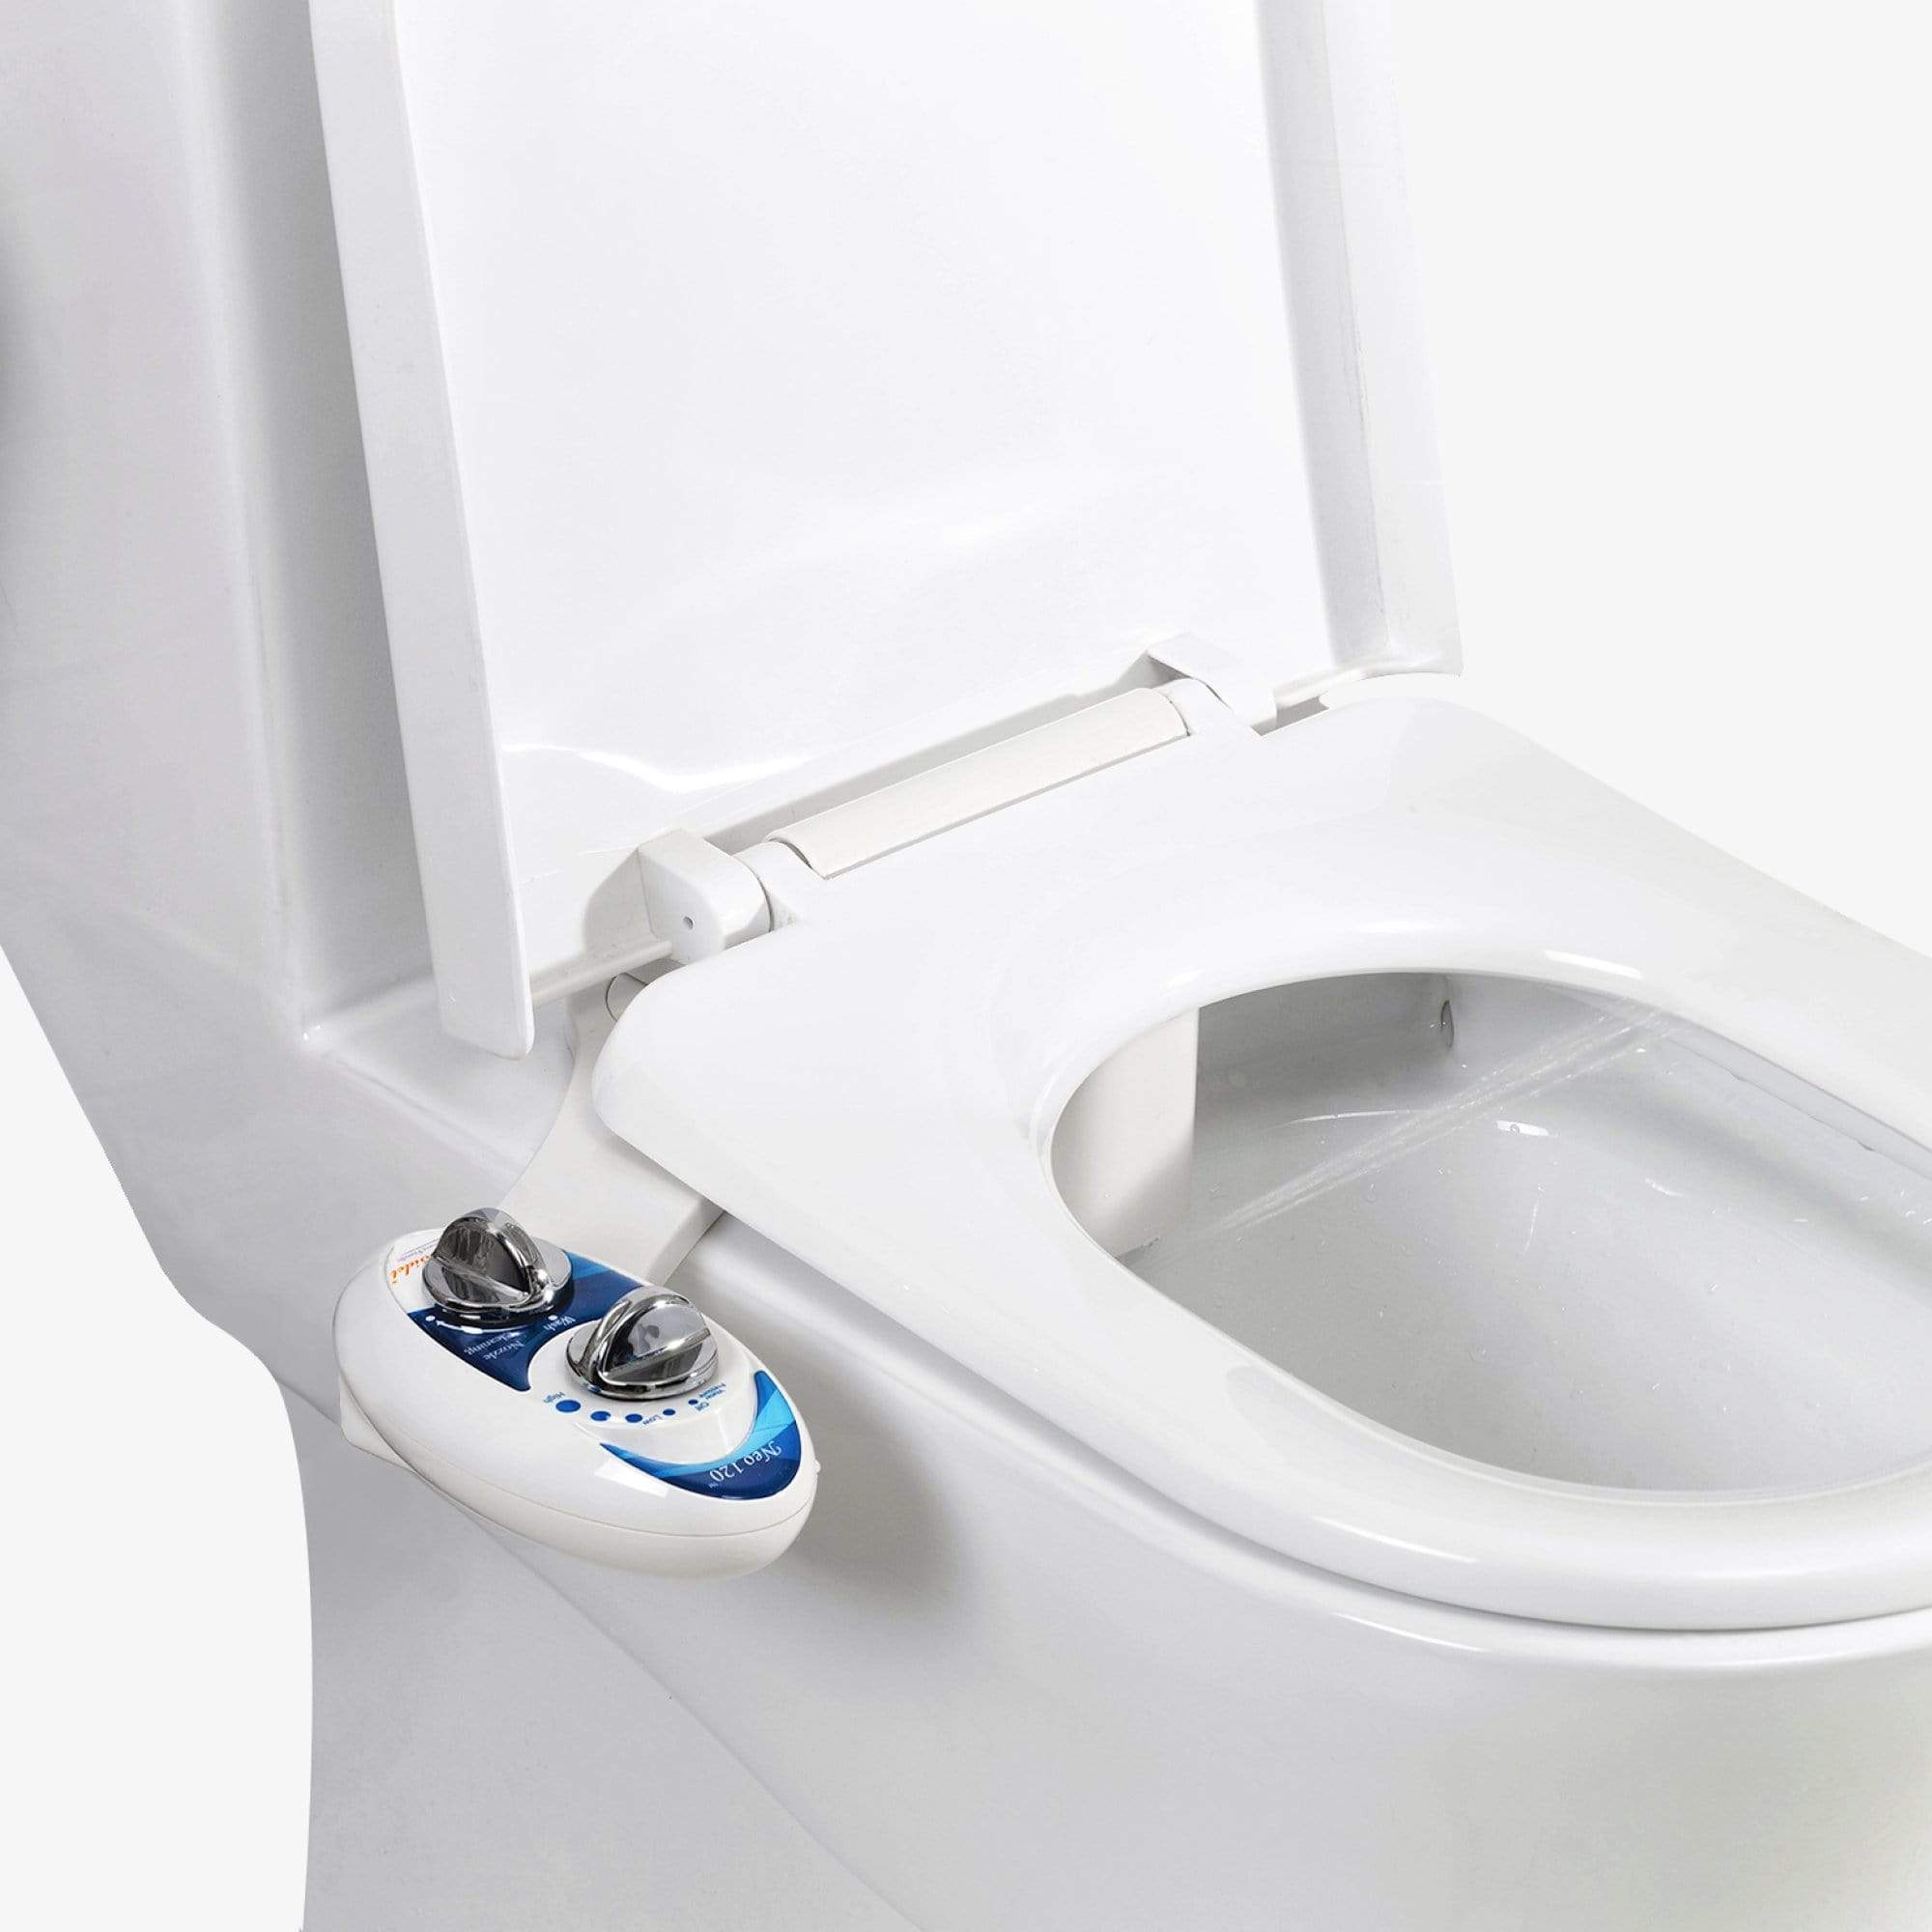 NEO 120: Imperfect Packaging - NEO 120 Blue installed on a toilet with water spraying from nozzles